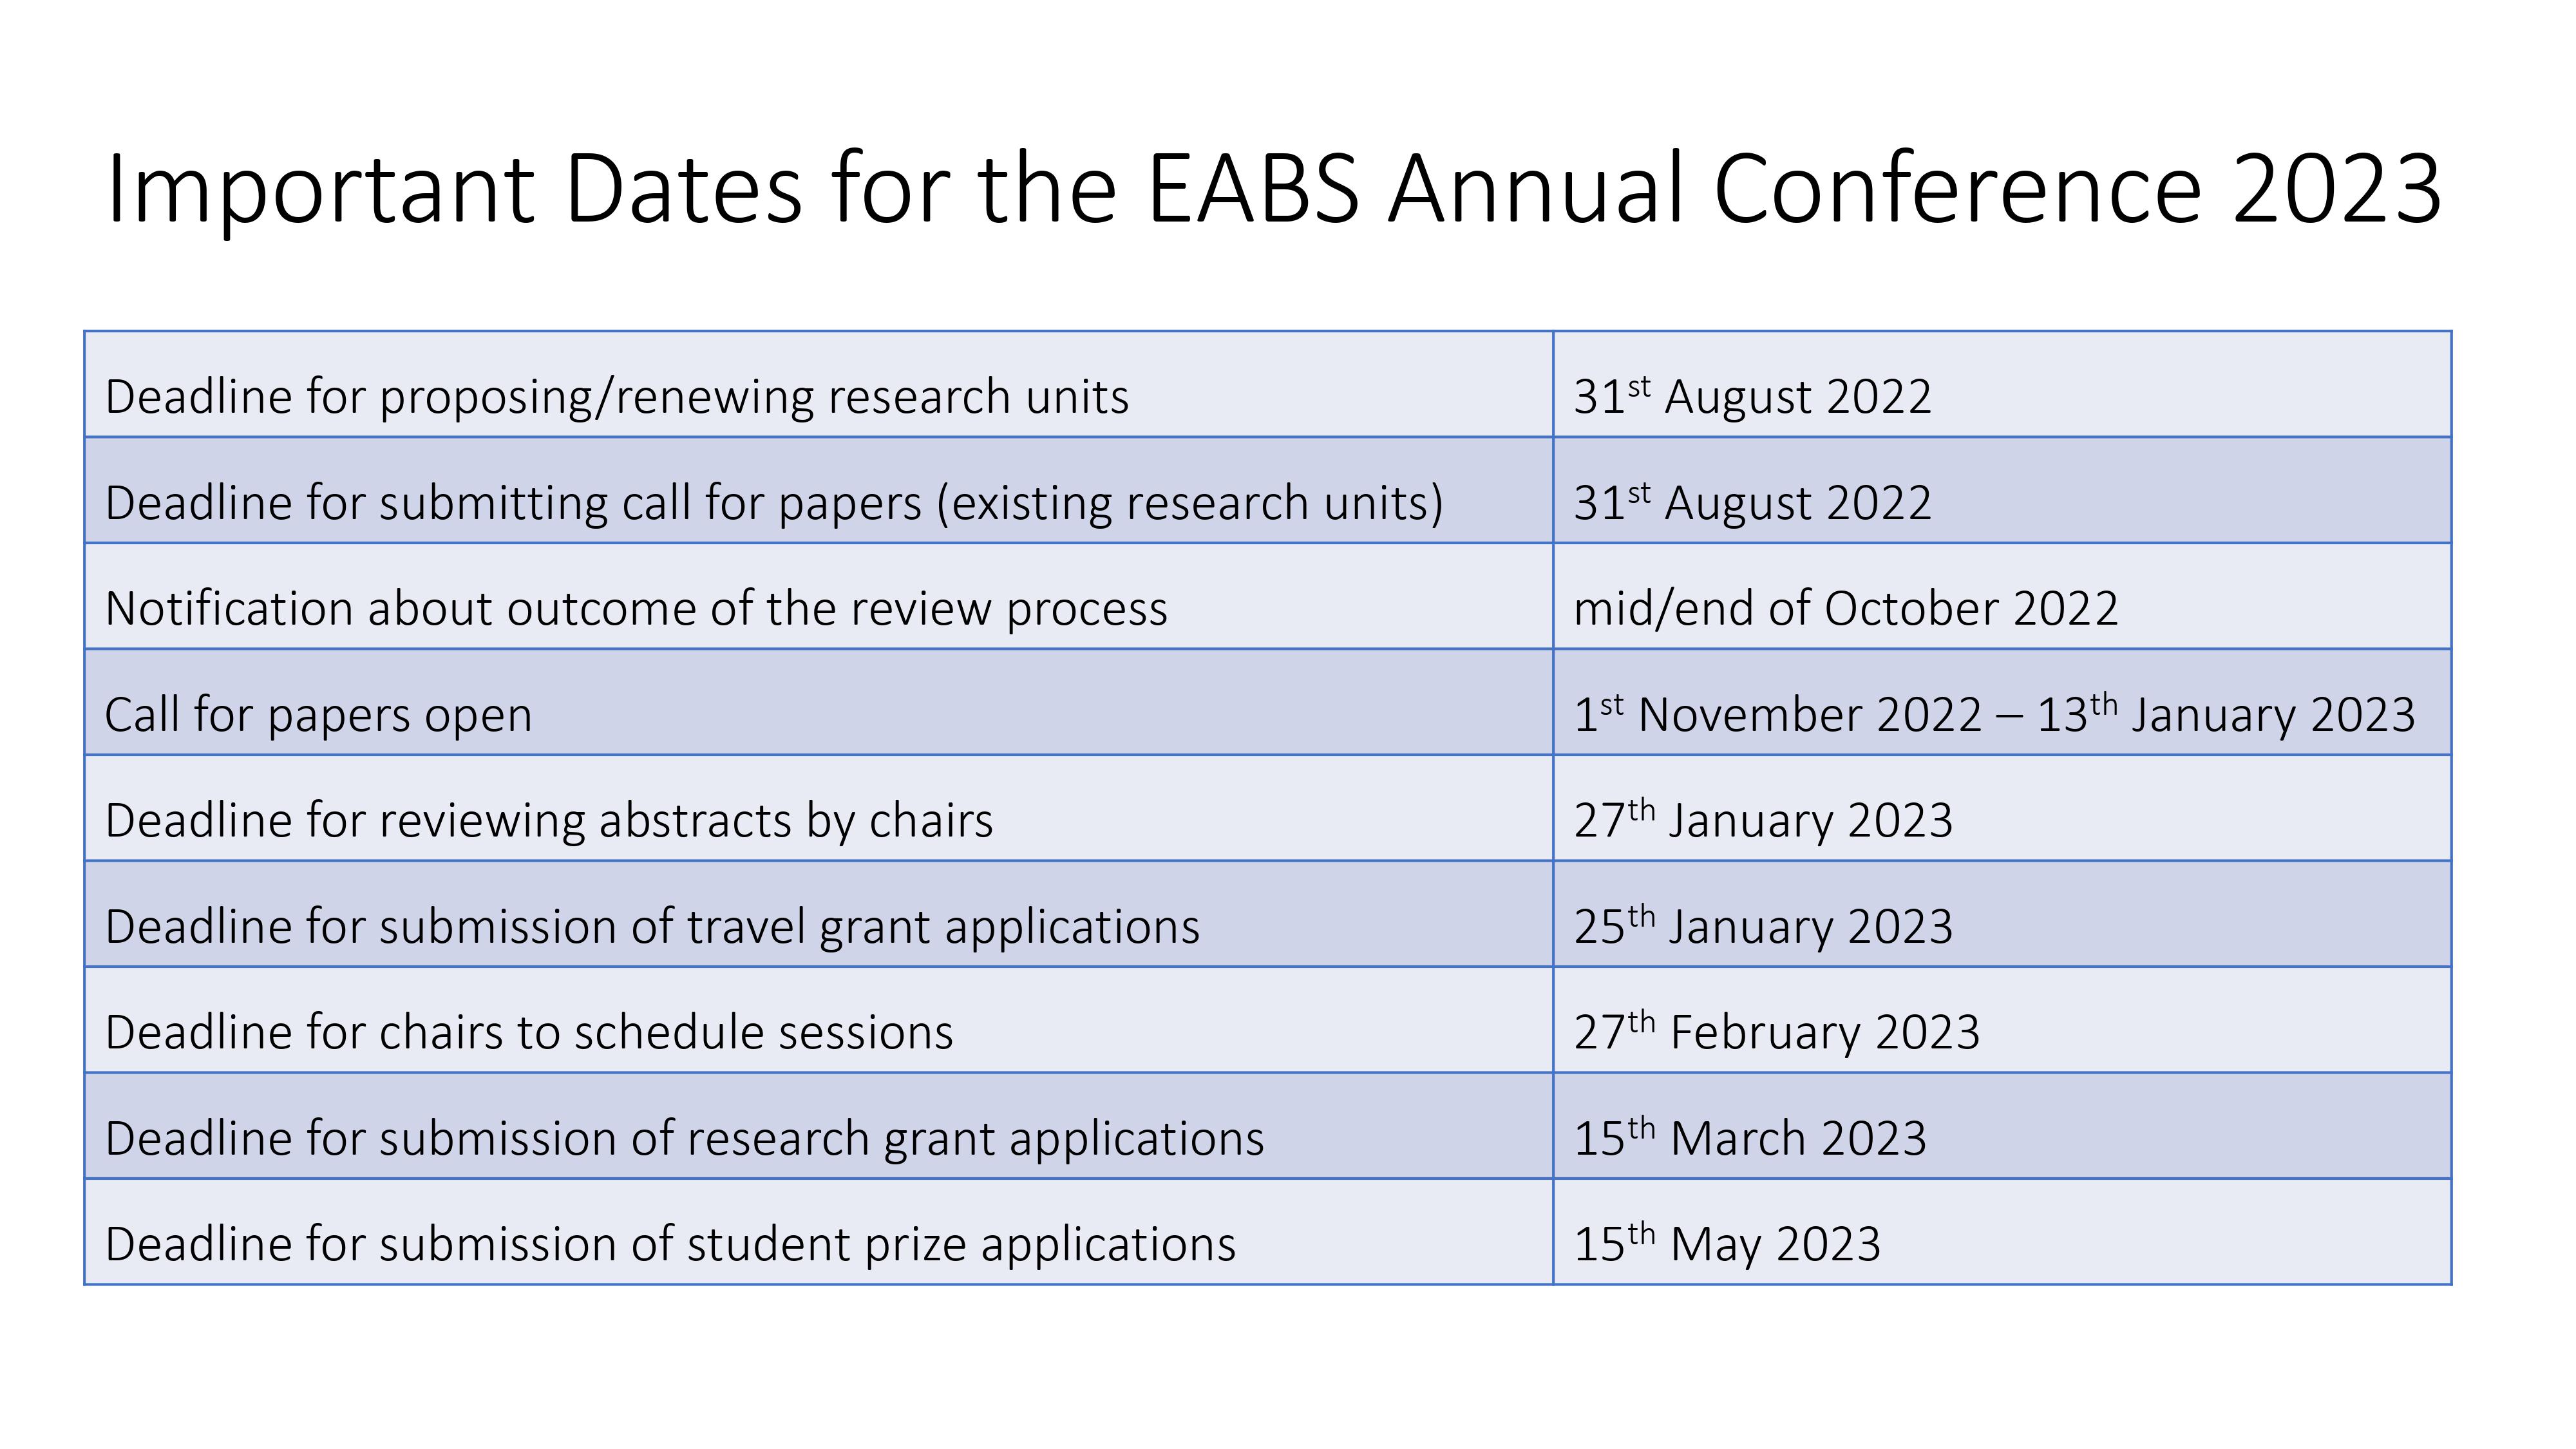 Important Dates For EABS 2023 